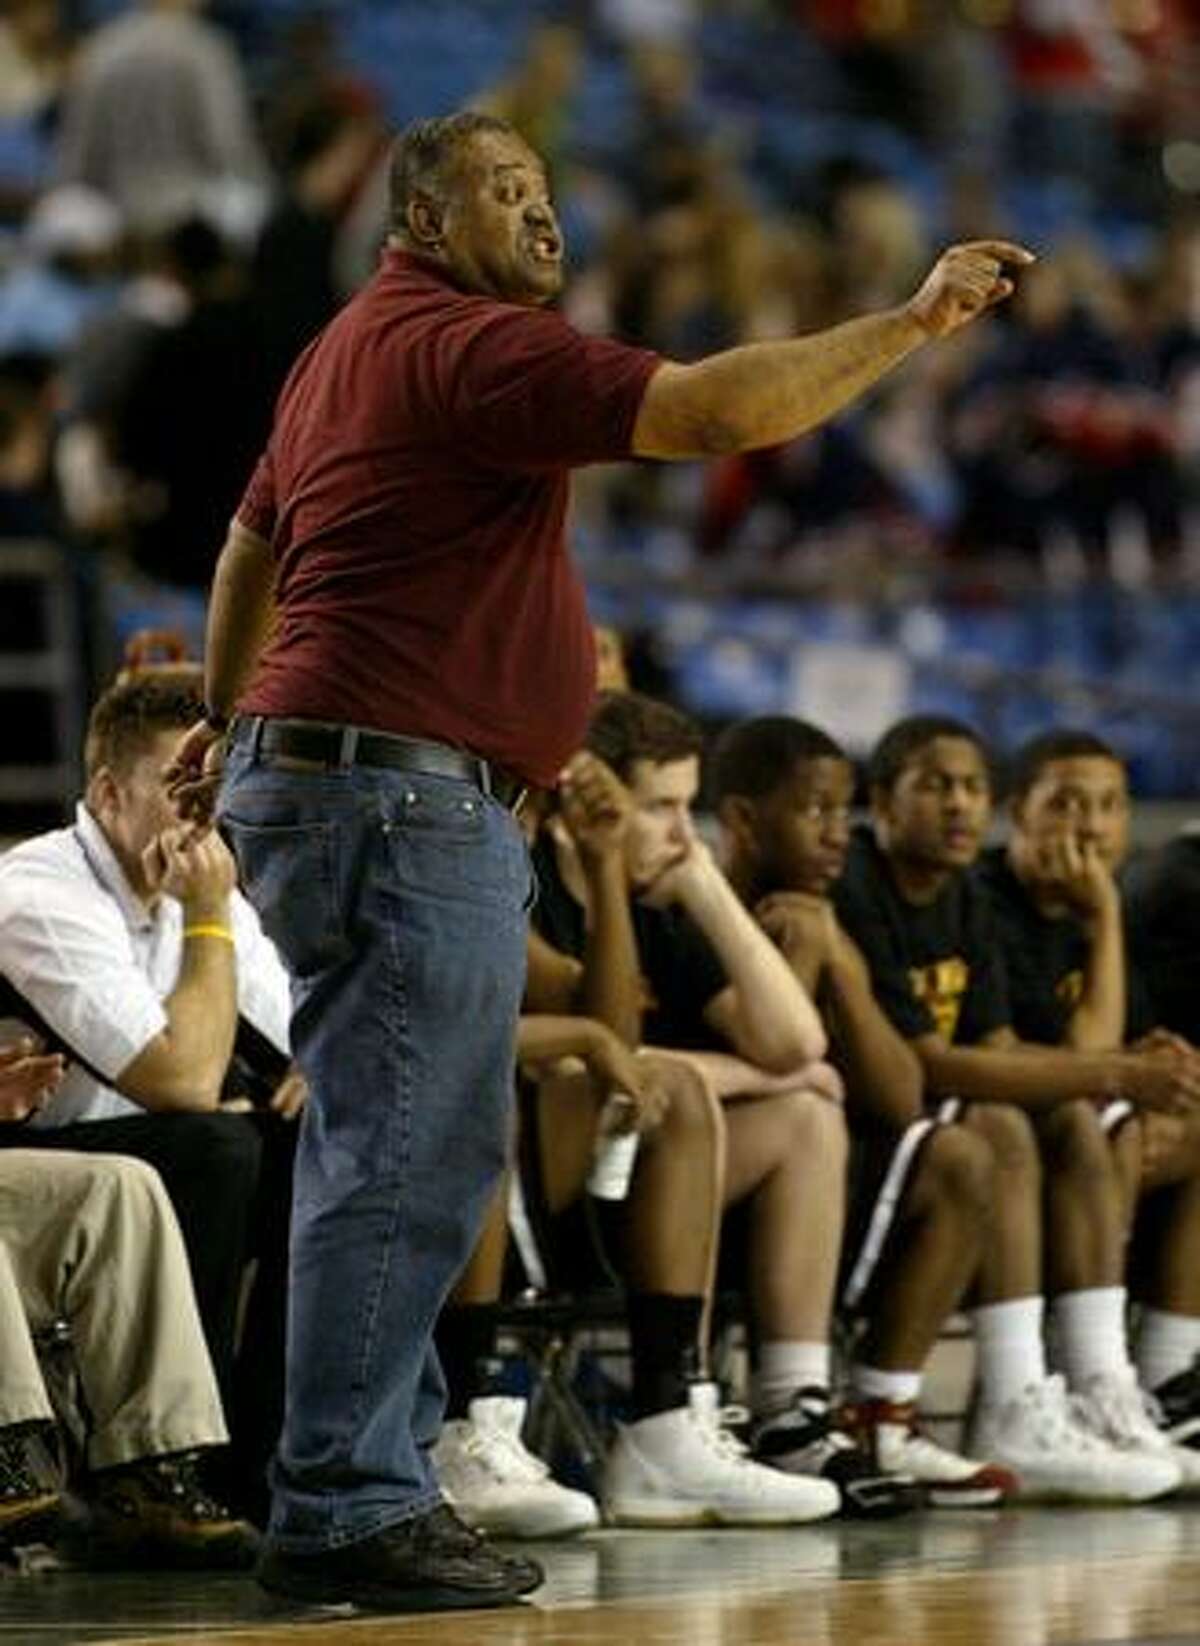 O'Dea basketball coach Phil Lumpkin in the fourth quarter of a 2006 playoff game against North Central High School of Spokane. O'Dea won the game 65-64 in the first round of the Class 3A state tournament. (Scott Eklund/seattlepi.com file)